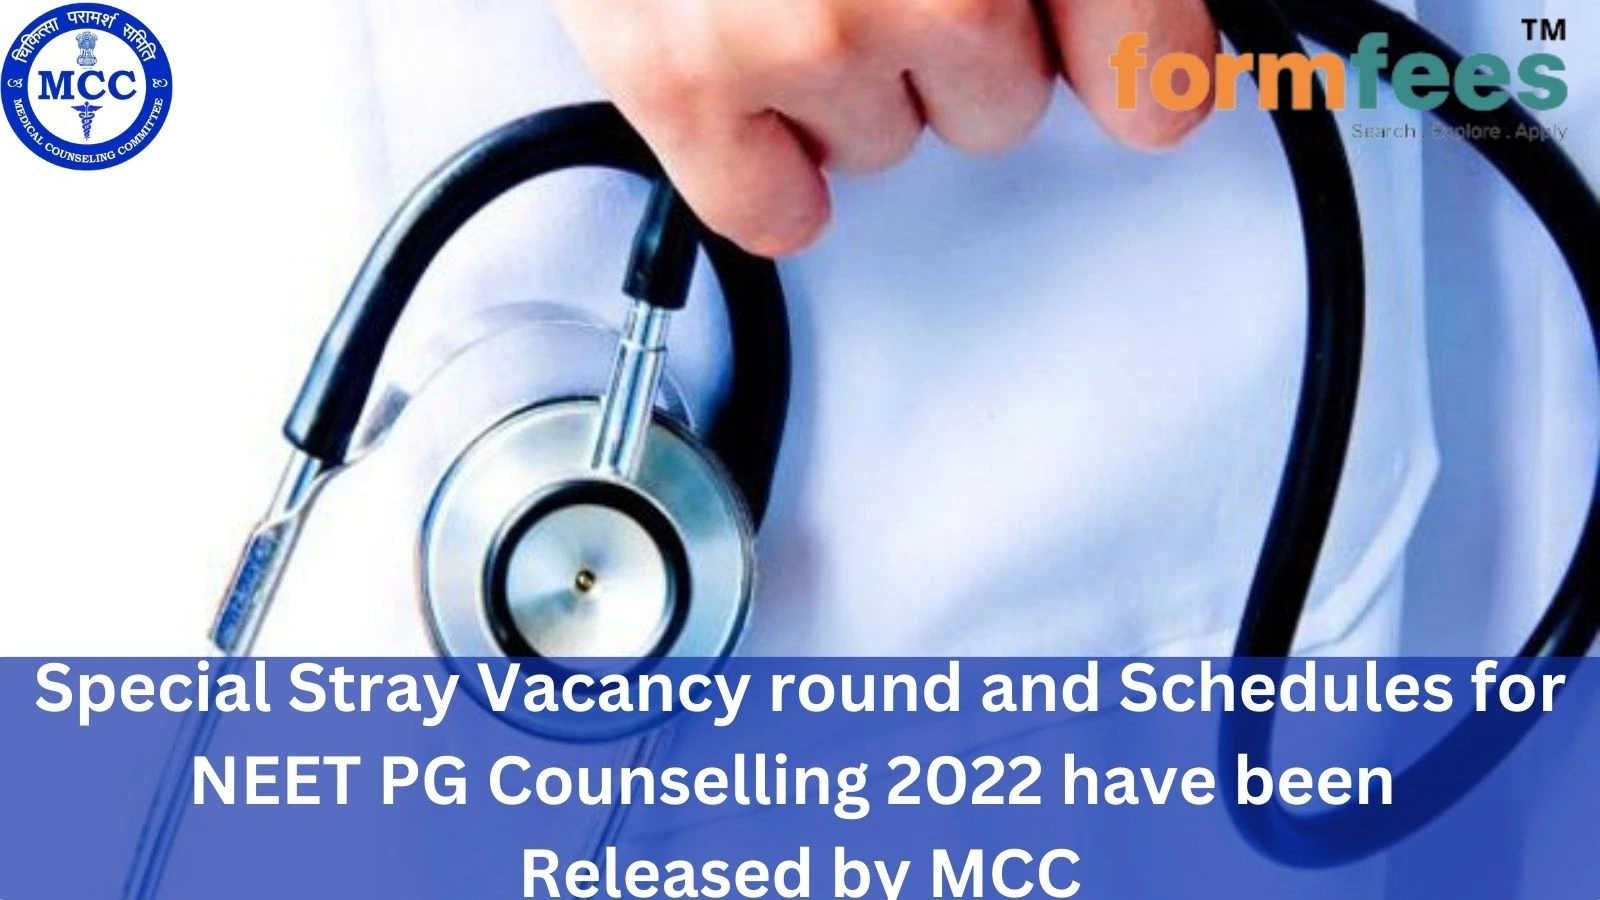 Special Stray Vacancy round and Schedules for NEET PG Counselling 2022 have been Released by MCC